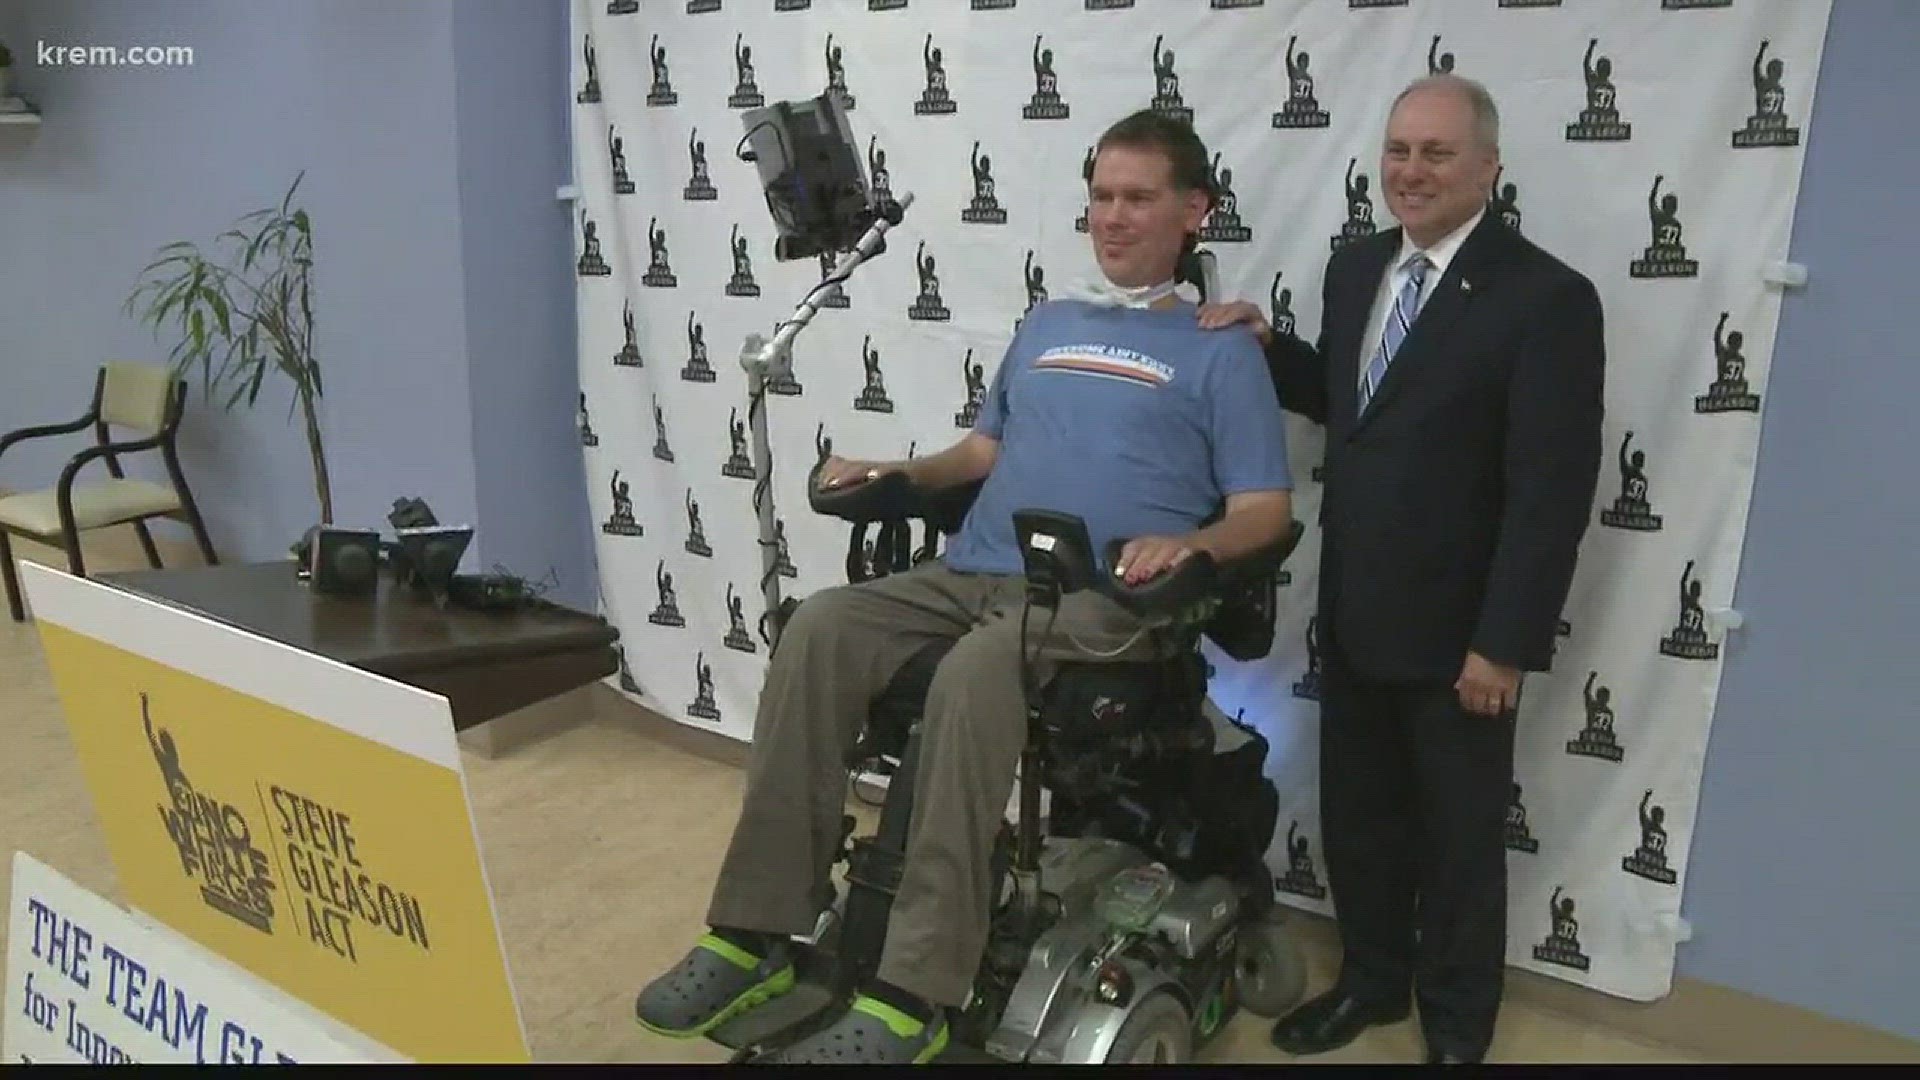 Now that the funding bill has passed -- the Steve Gleason Enduring Voices Act is official. KREM 2's Whitney Ward has details.